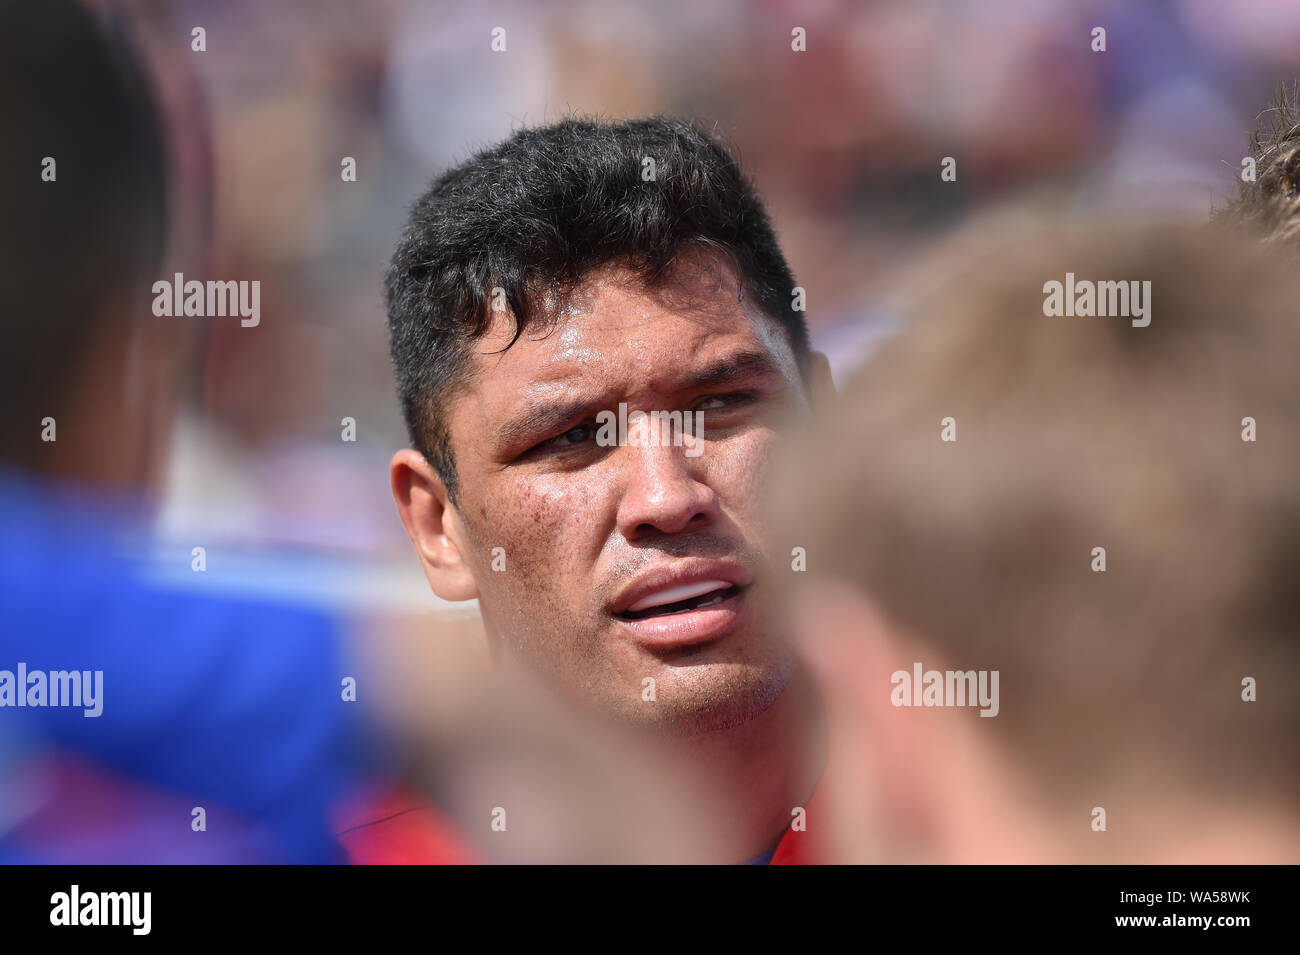 Wakefield, UK, 11 8 2019. 11 August 2019. Mobile Rocket Stadium, Wakefield, England; Rugby League Betfred Super League, Wakefield Trinity vs Hull FC;  Wakefield Trinity prop Adam Tangata  Dean Williams/RugbyPixUK Stock Photo